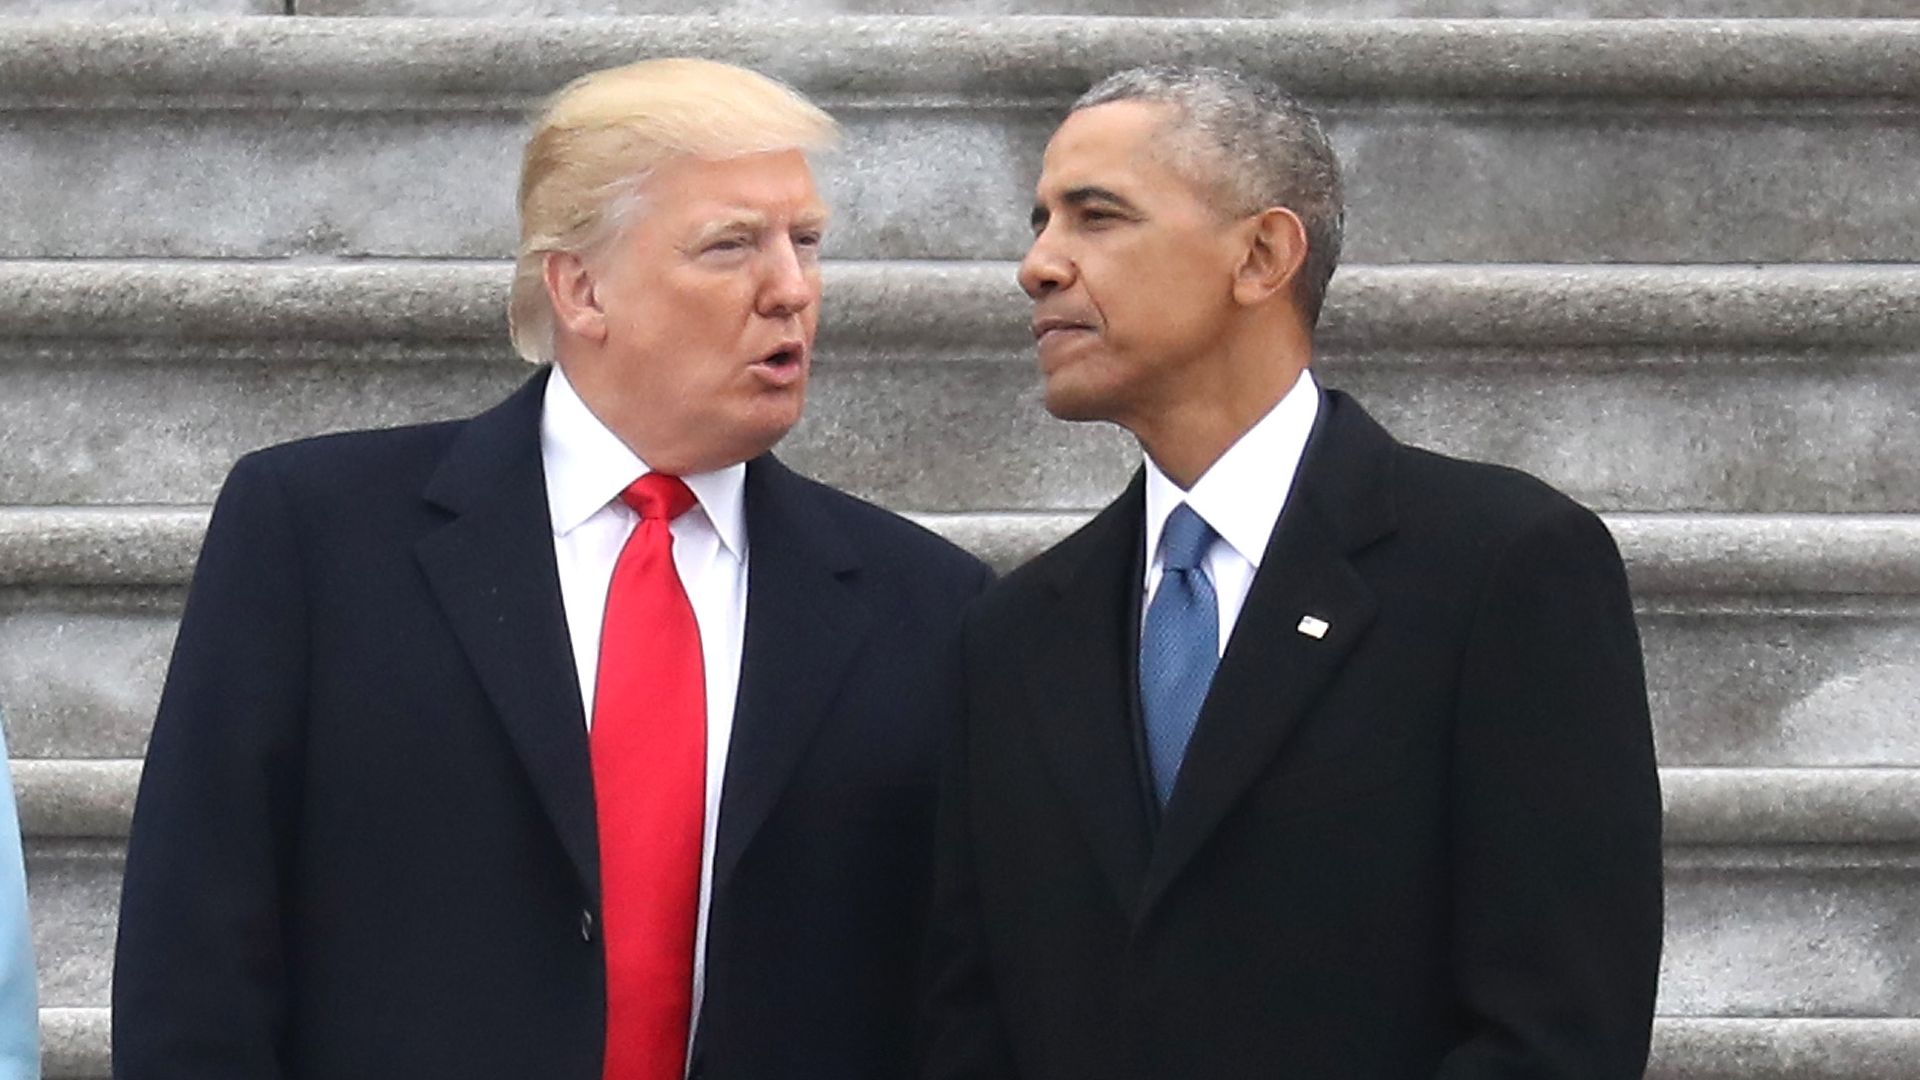 President Donald Trump and former president Barack Obama at the U.S. Capitol on January 20, 2017.